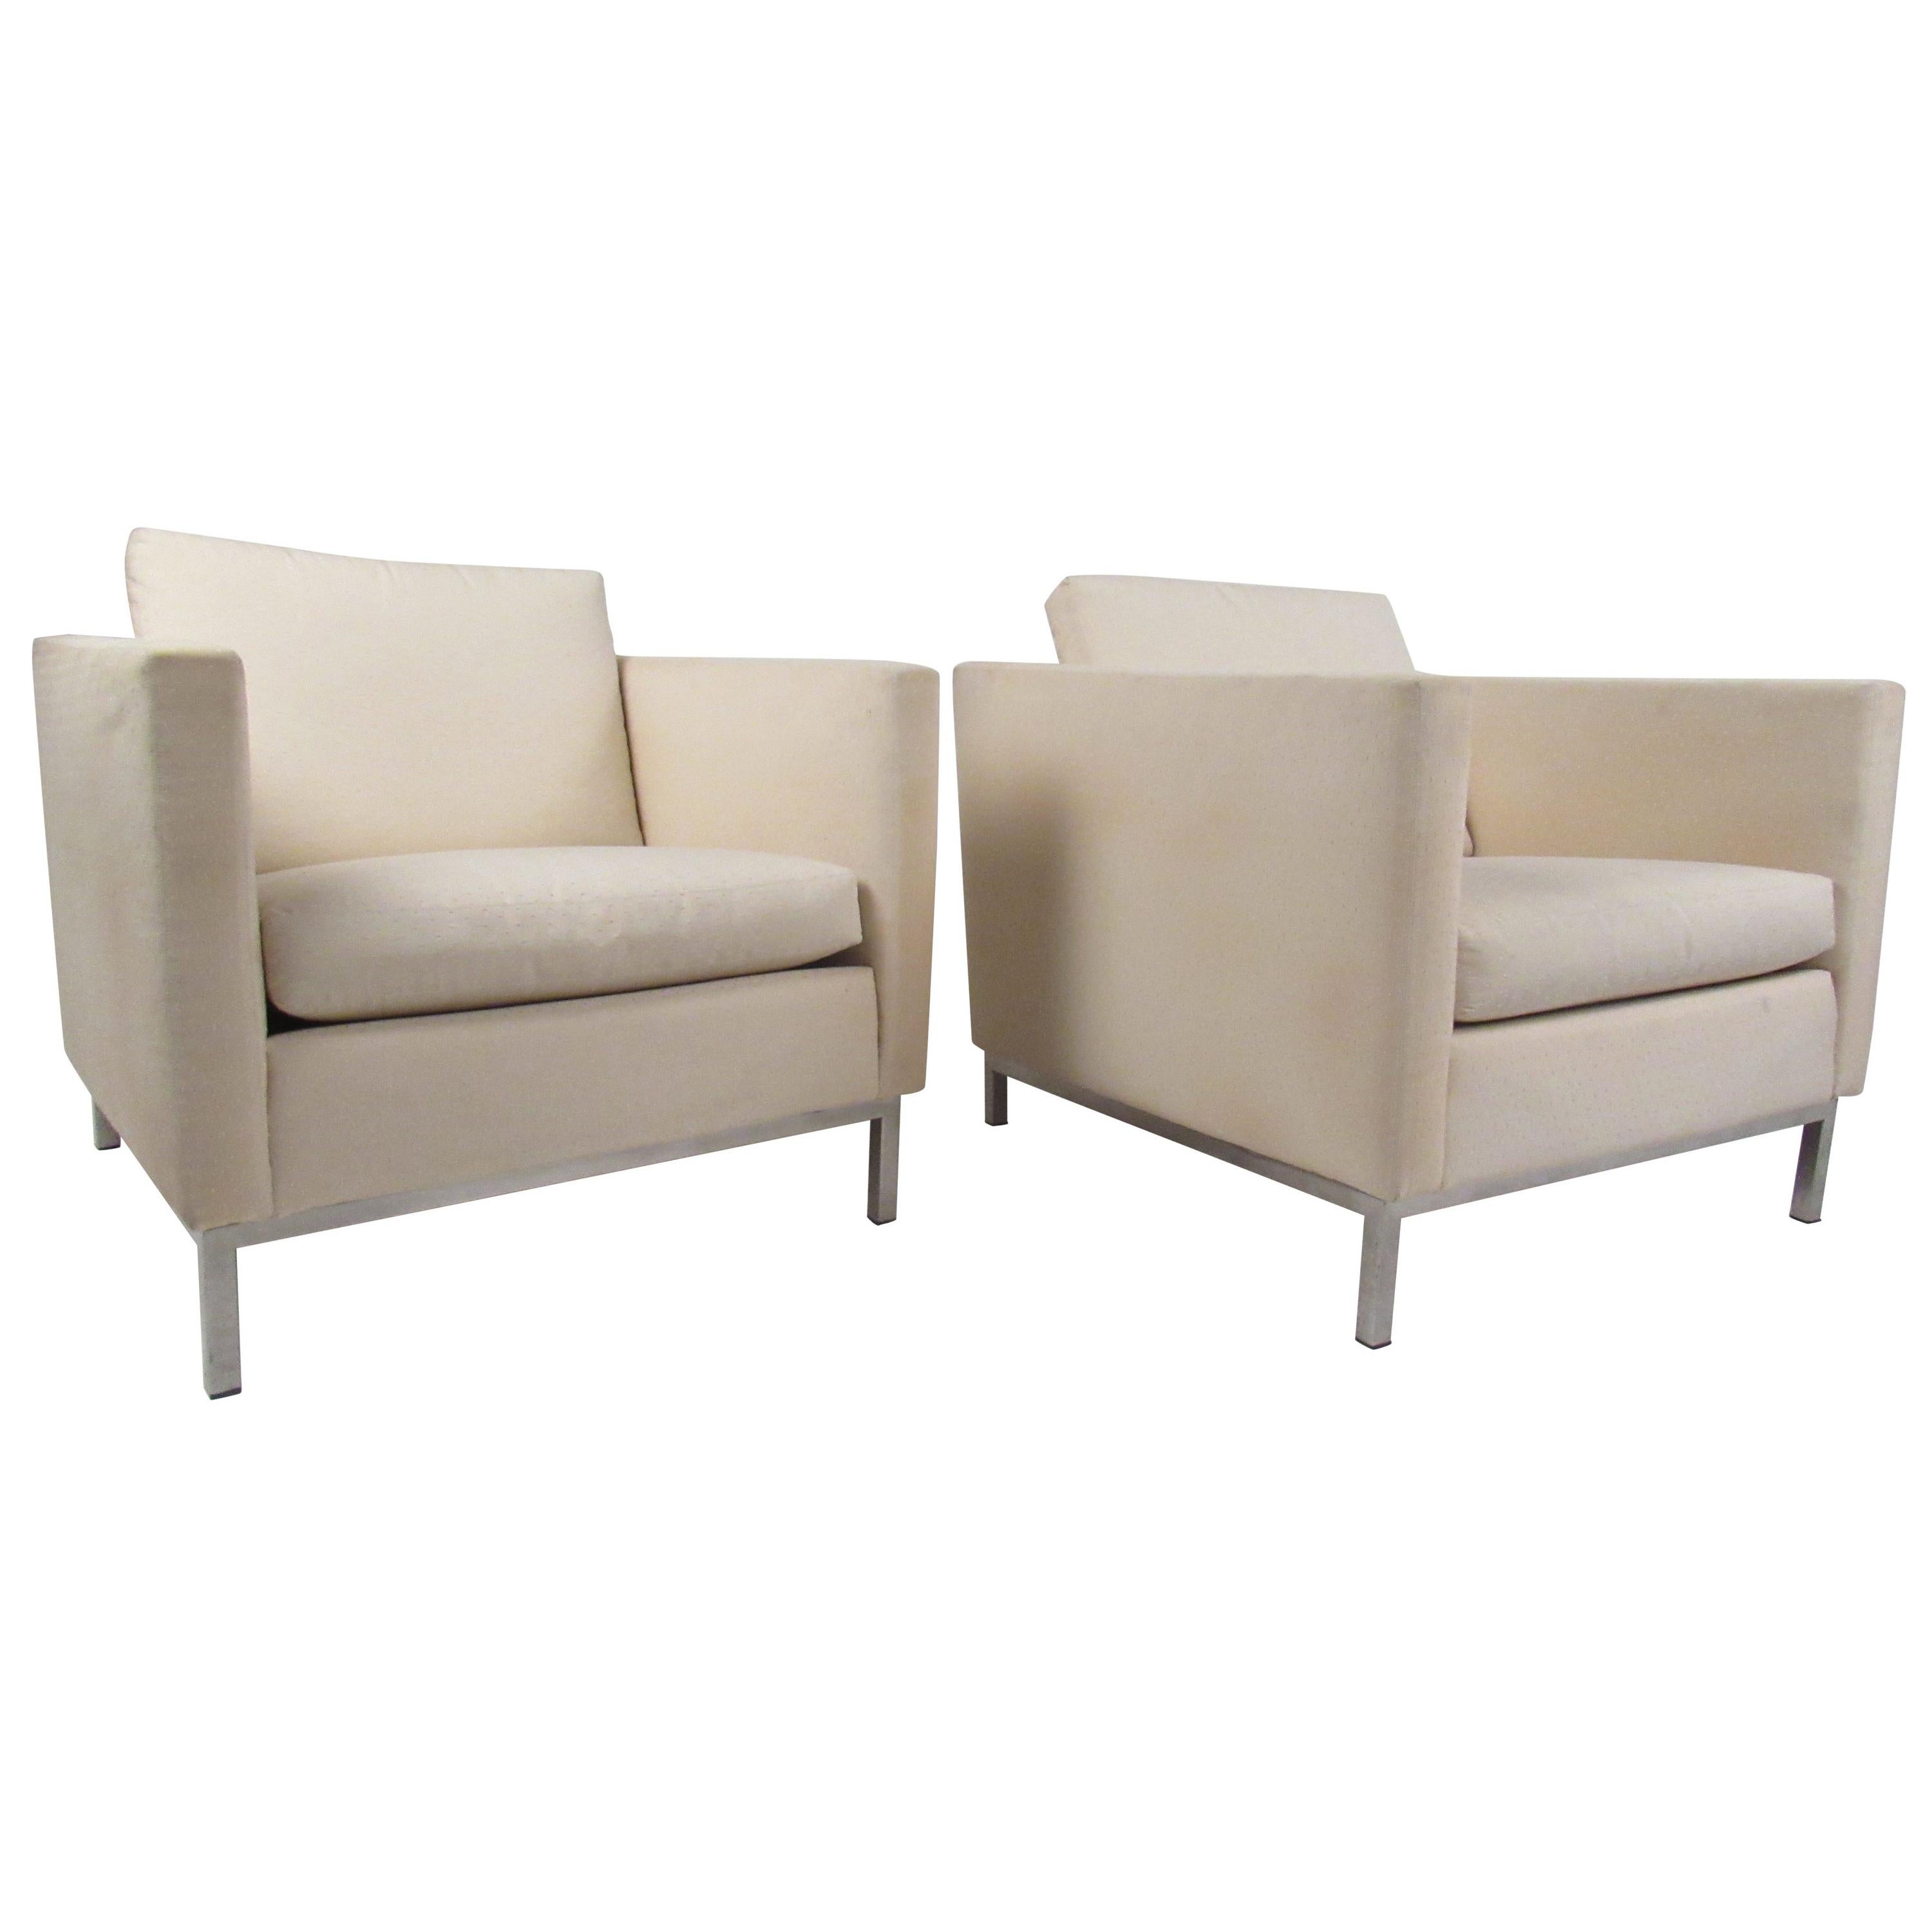 Pair of Mid-Century Modern Club Chairs For Sale